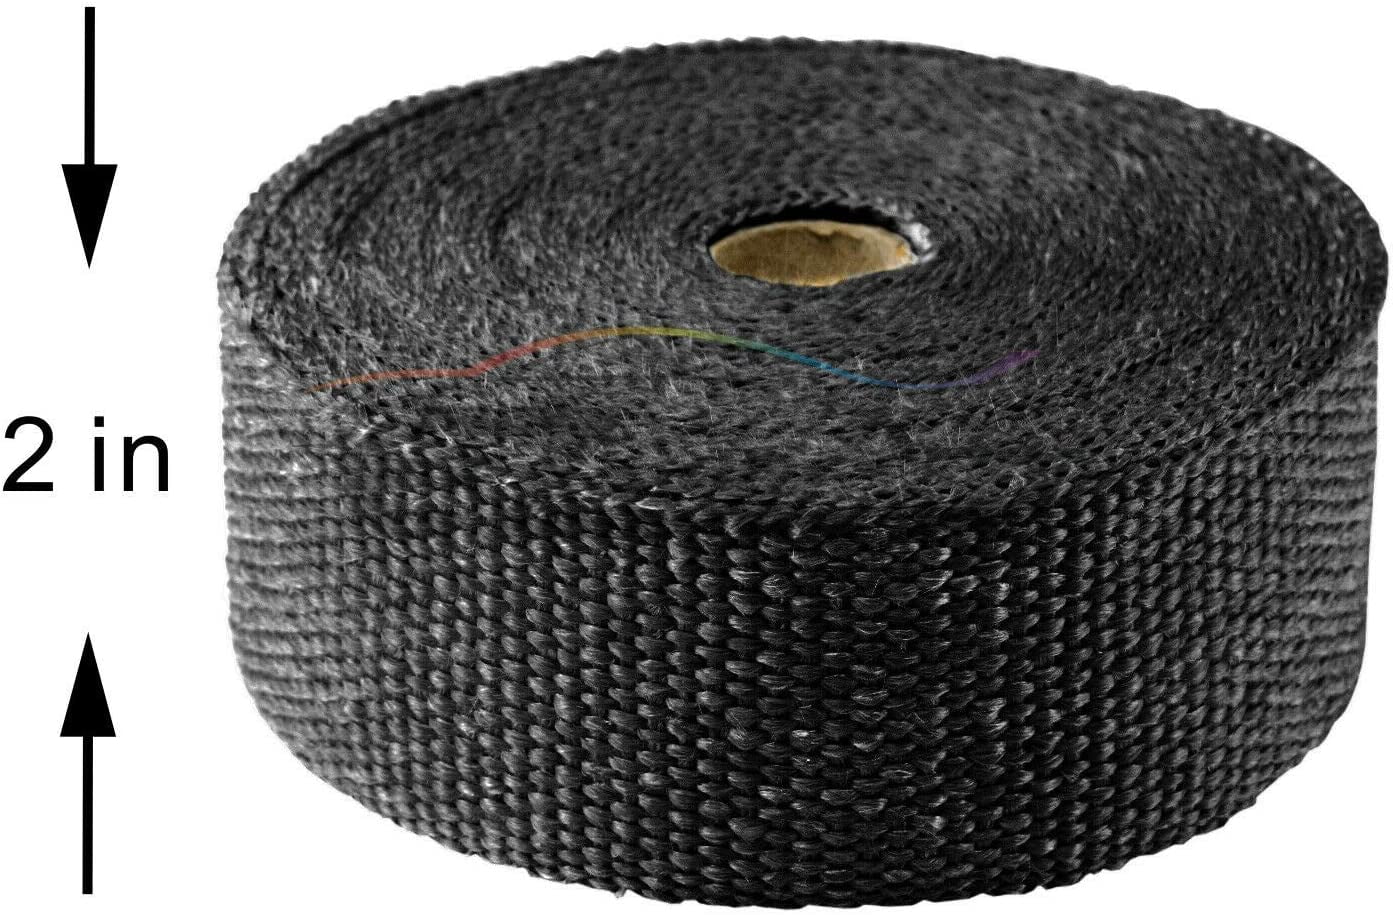 WHITE High Temperature Header Exhaust Pipe Insulation Wrap Kit: 2 Rolls  each 2 INCH WIDE X 25 FEET LONG with Stainless Steel Zip Ties Kit- Thermal  Zero - WT116225TKX2